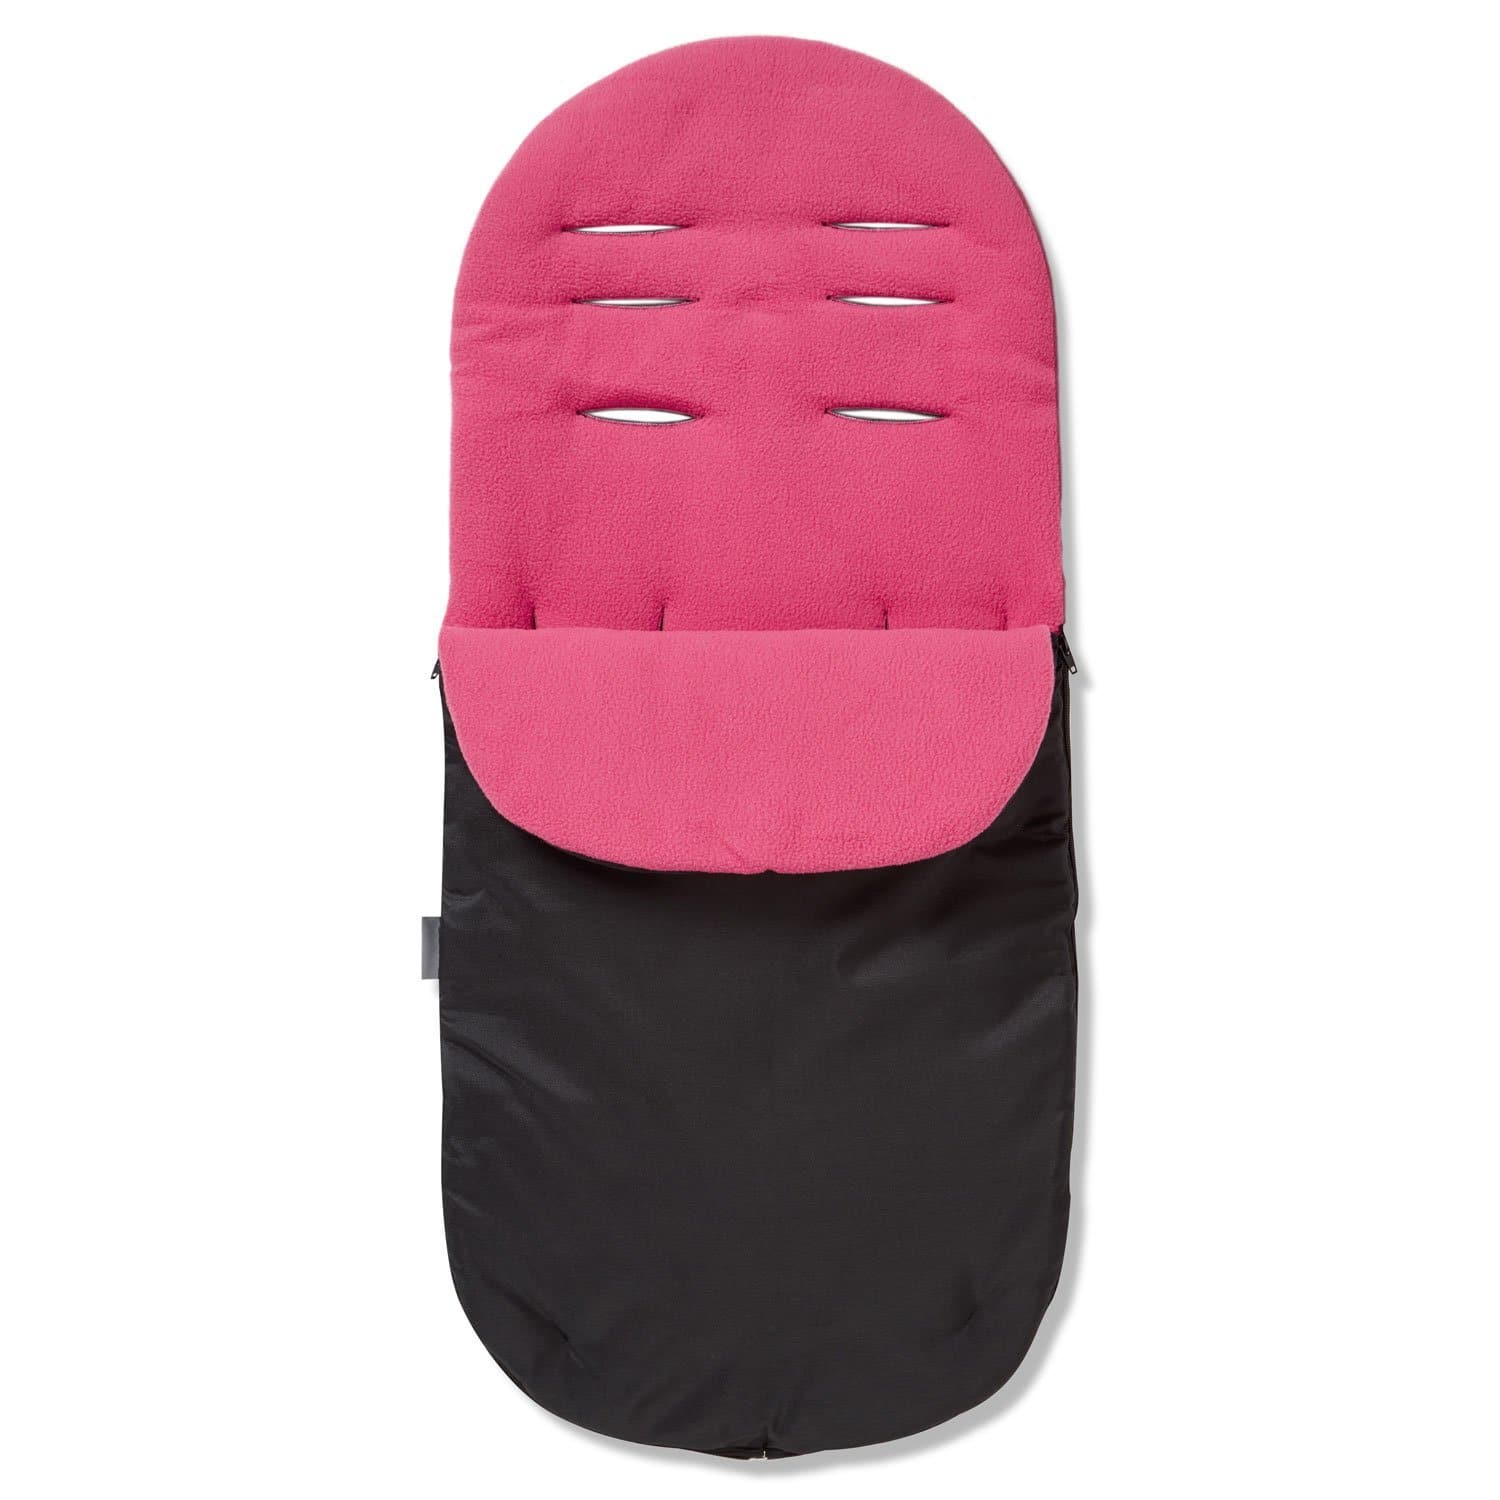 Footmuff / Cosy Toes Compatible with Mima - Dark Pink / Fits All Models | For Your Little One